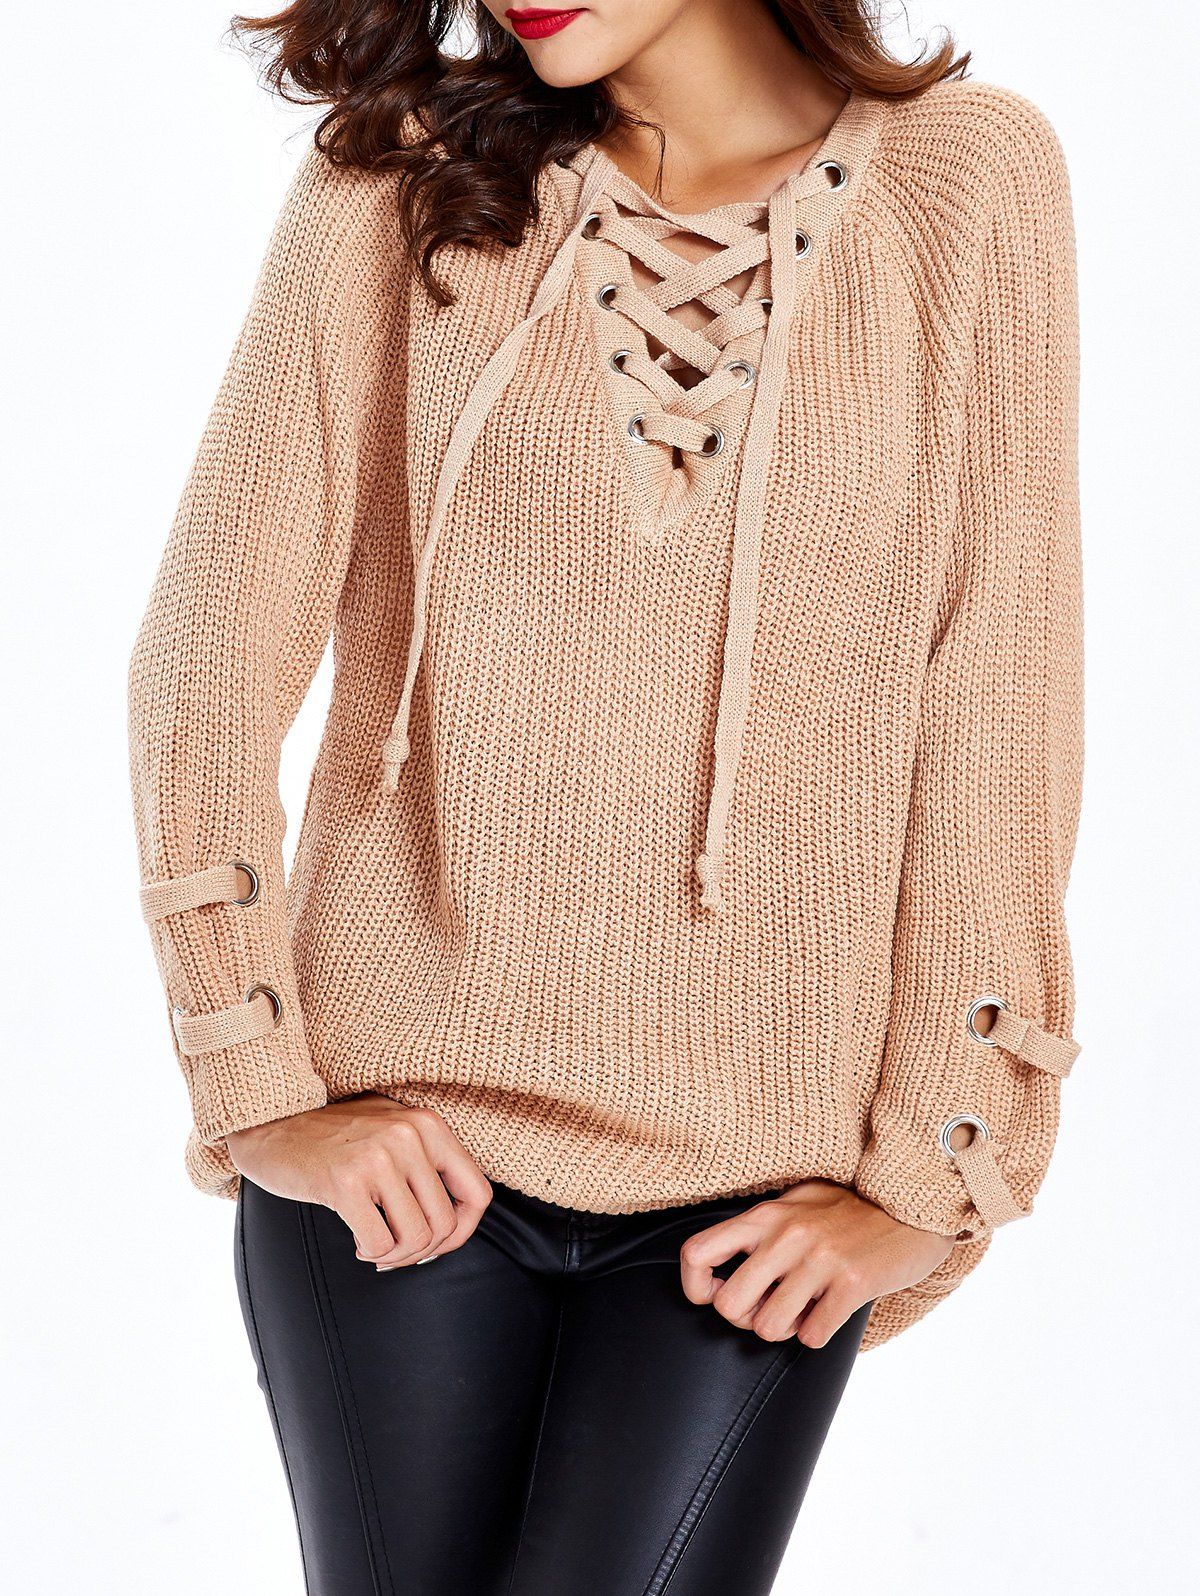 Buy Lace Up Criss-Cross Long Sweater  